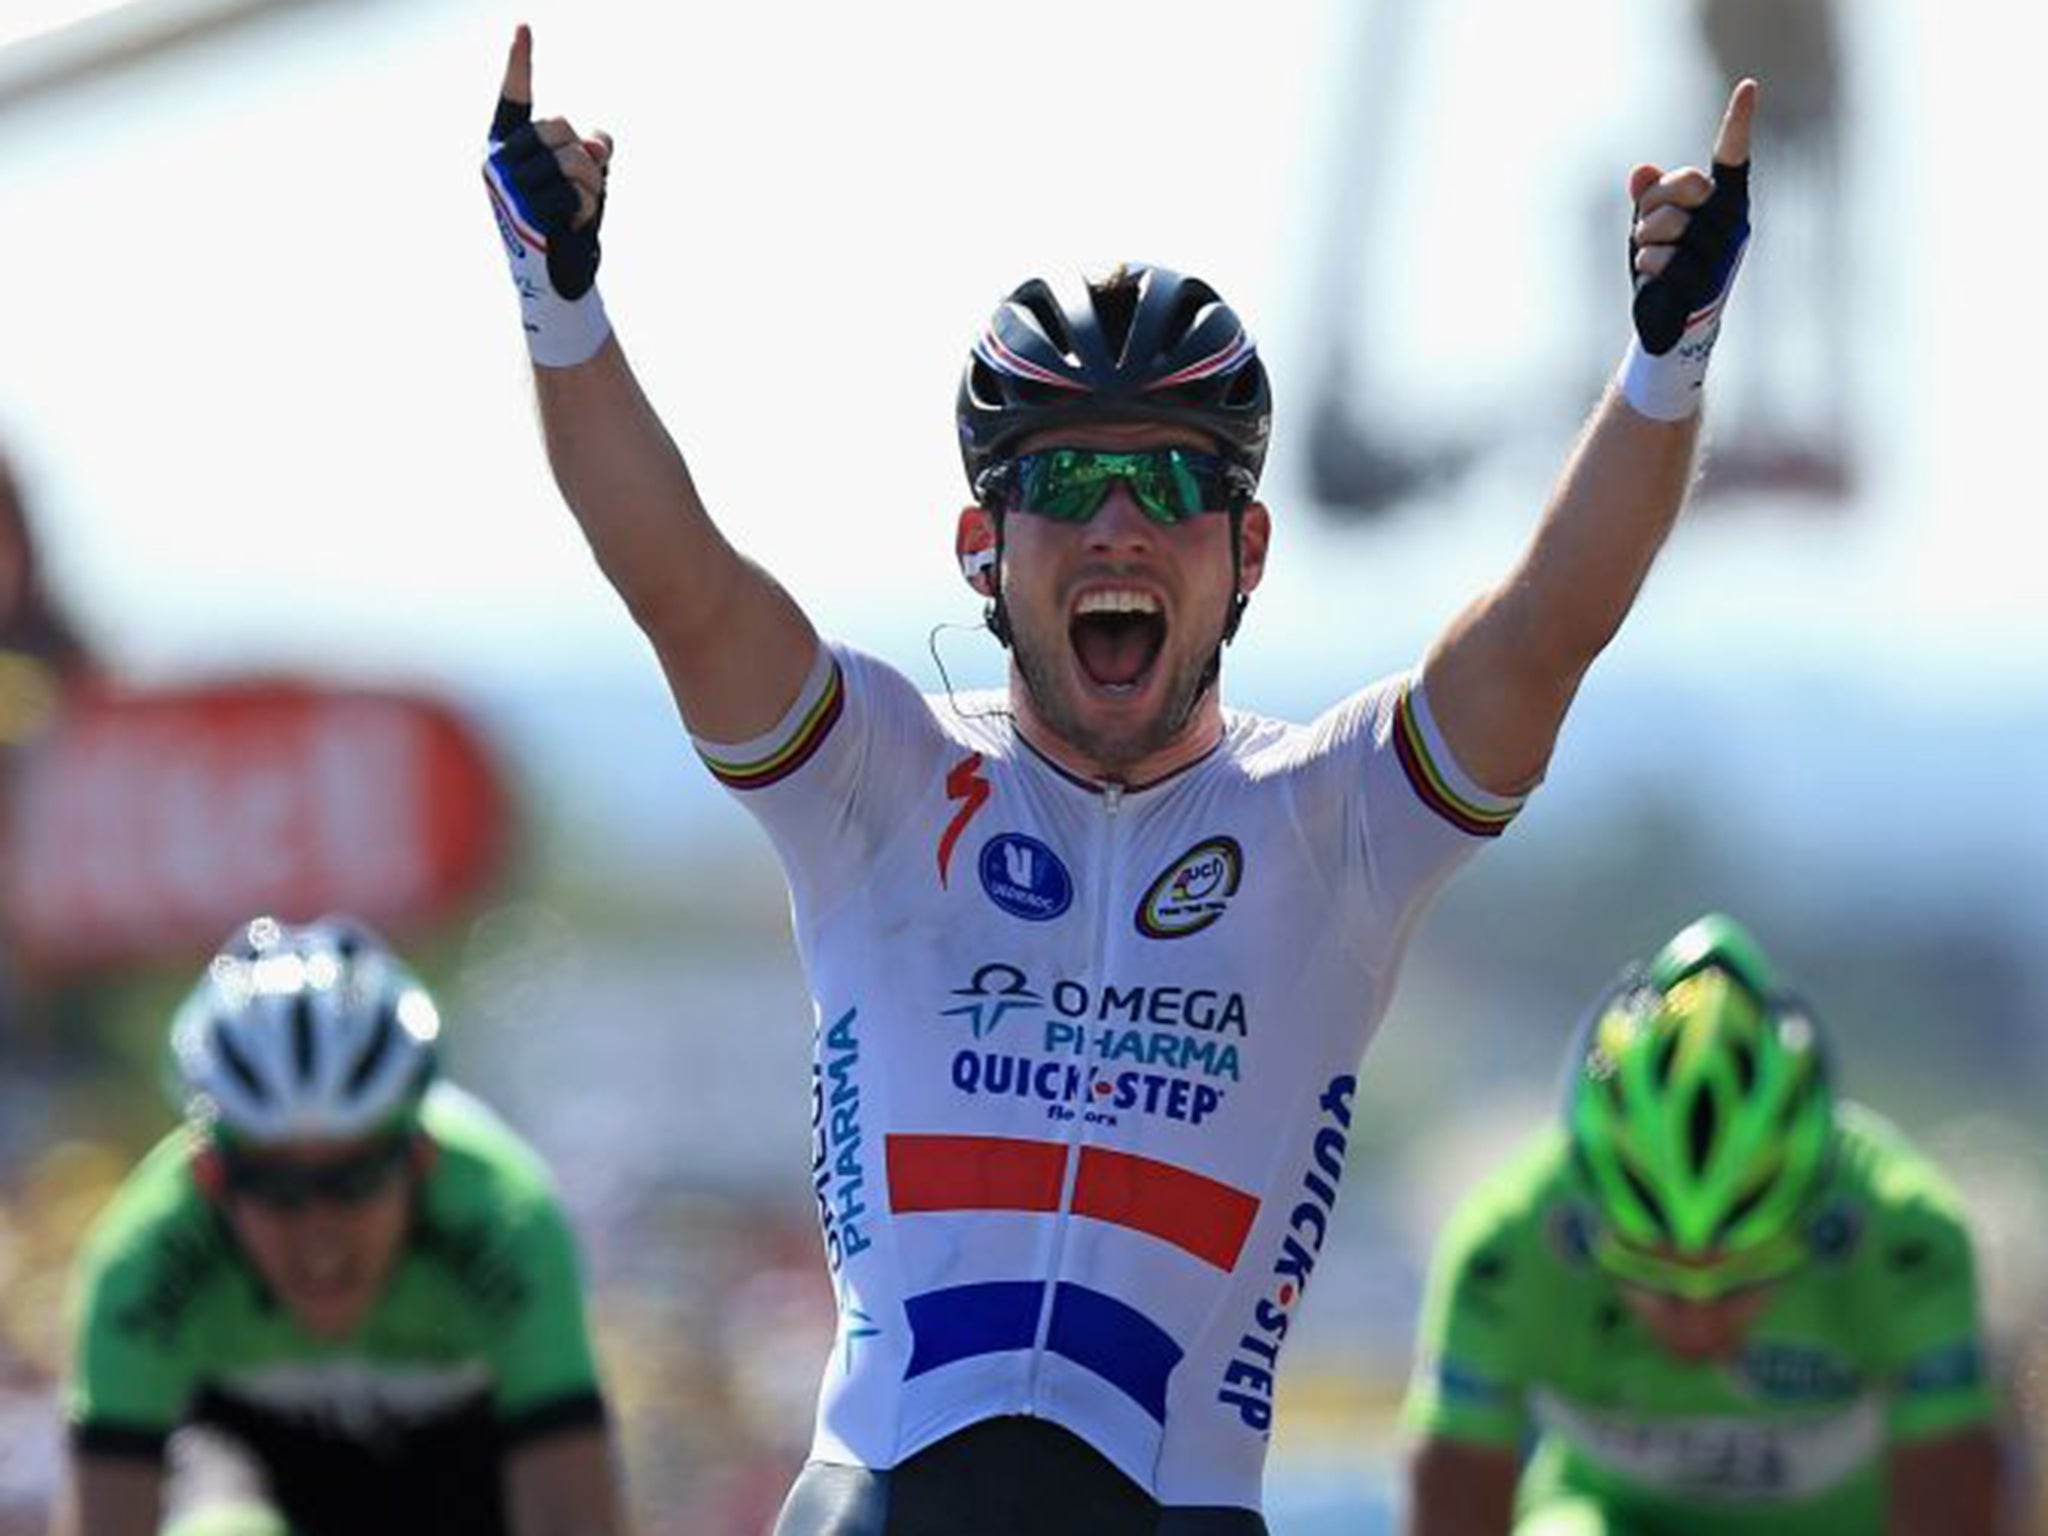 Mark Cavendish adds to his haul of stage wins in 2013, his last proper Tour before last year’s early exit